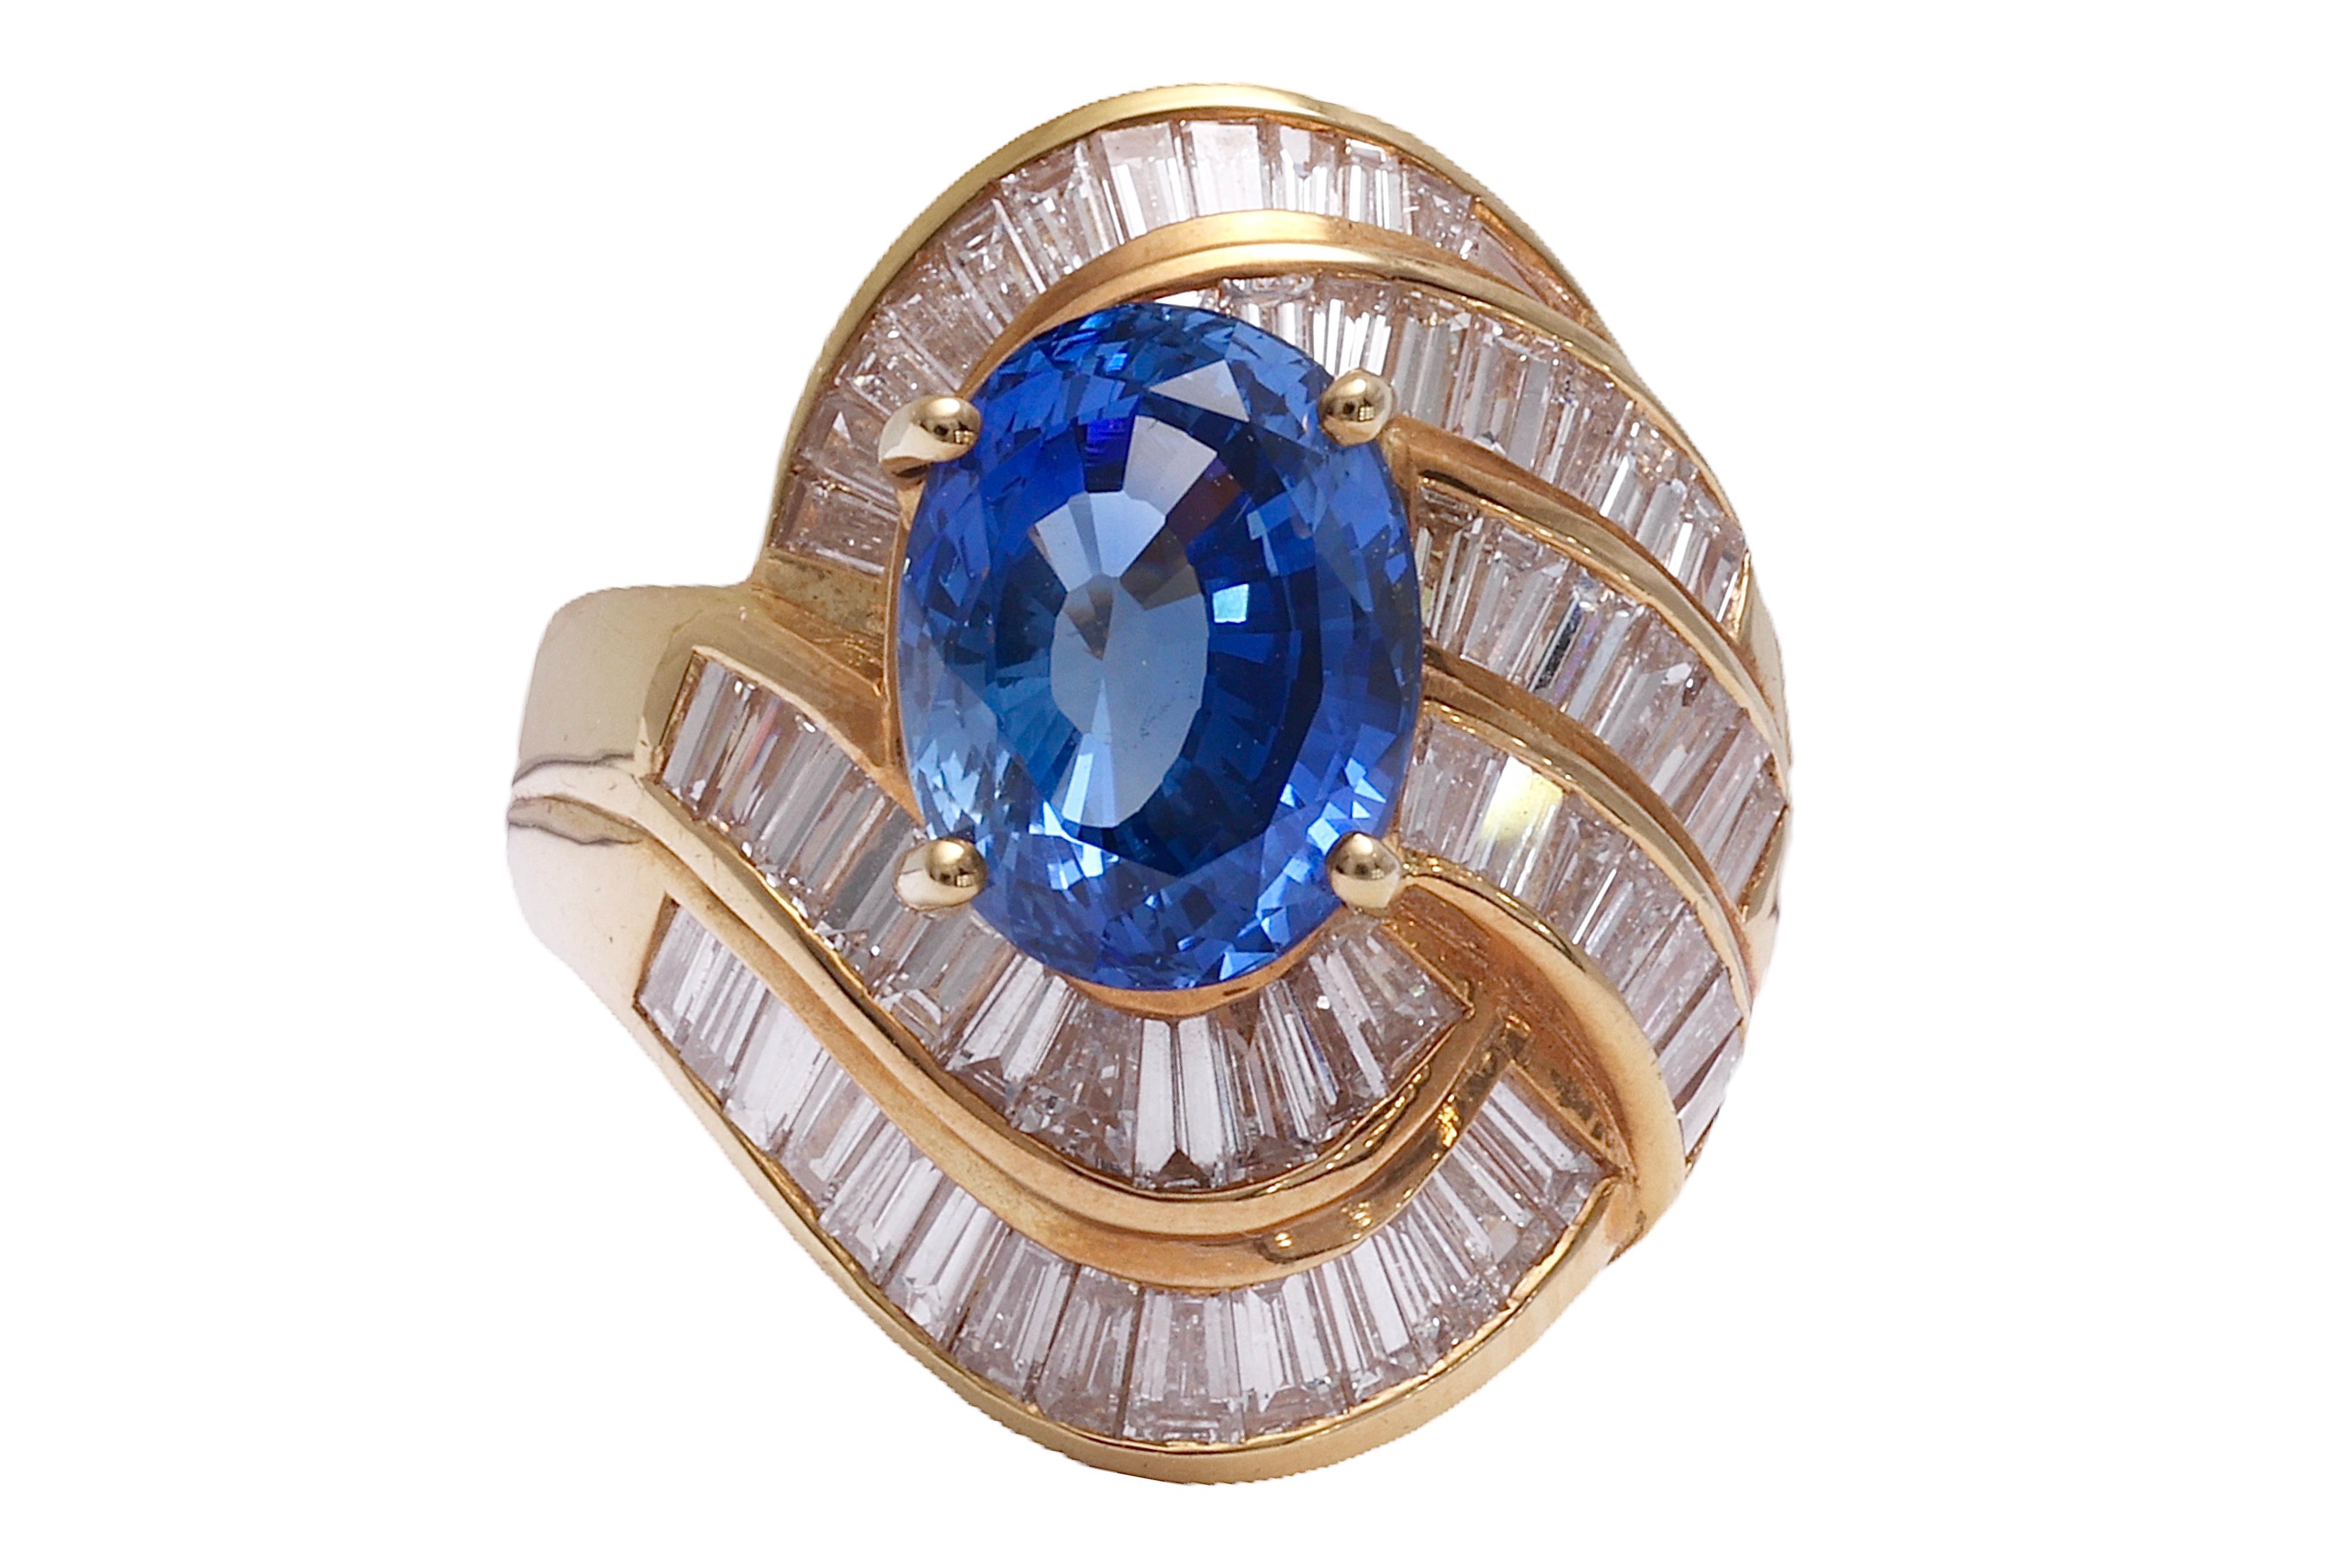  18 kt. Gold Ring With Ceylon Sapphire & Baguette Cut Diamonds For Sale 4